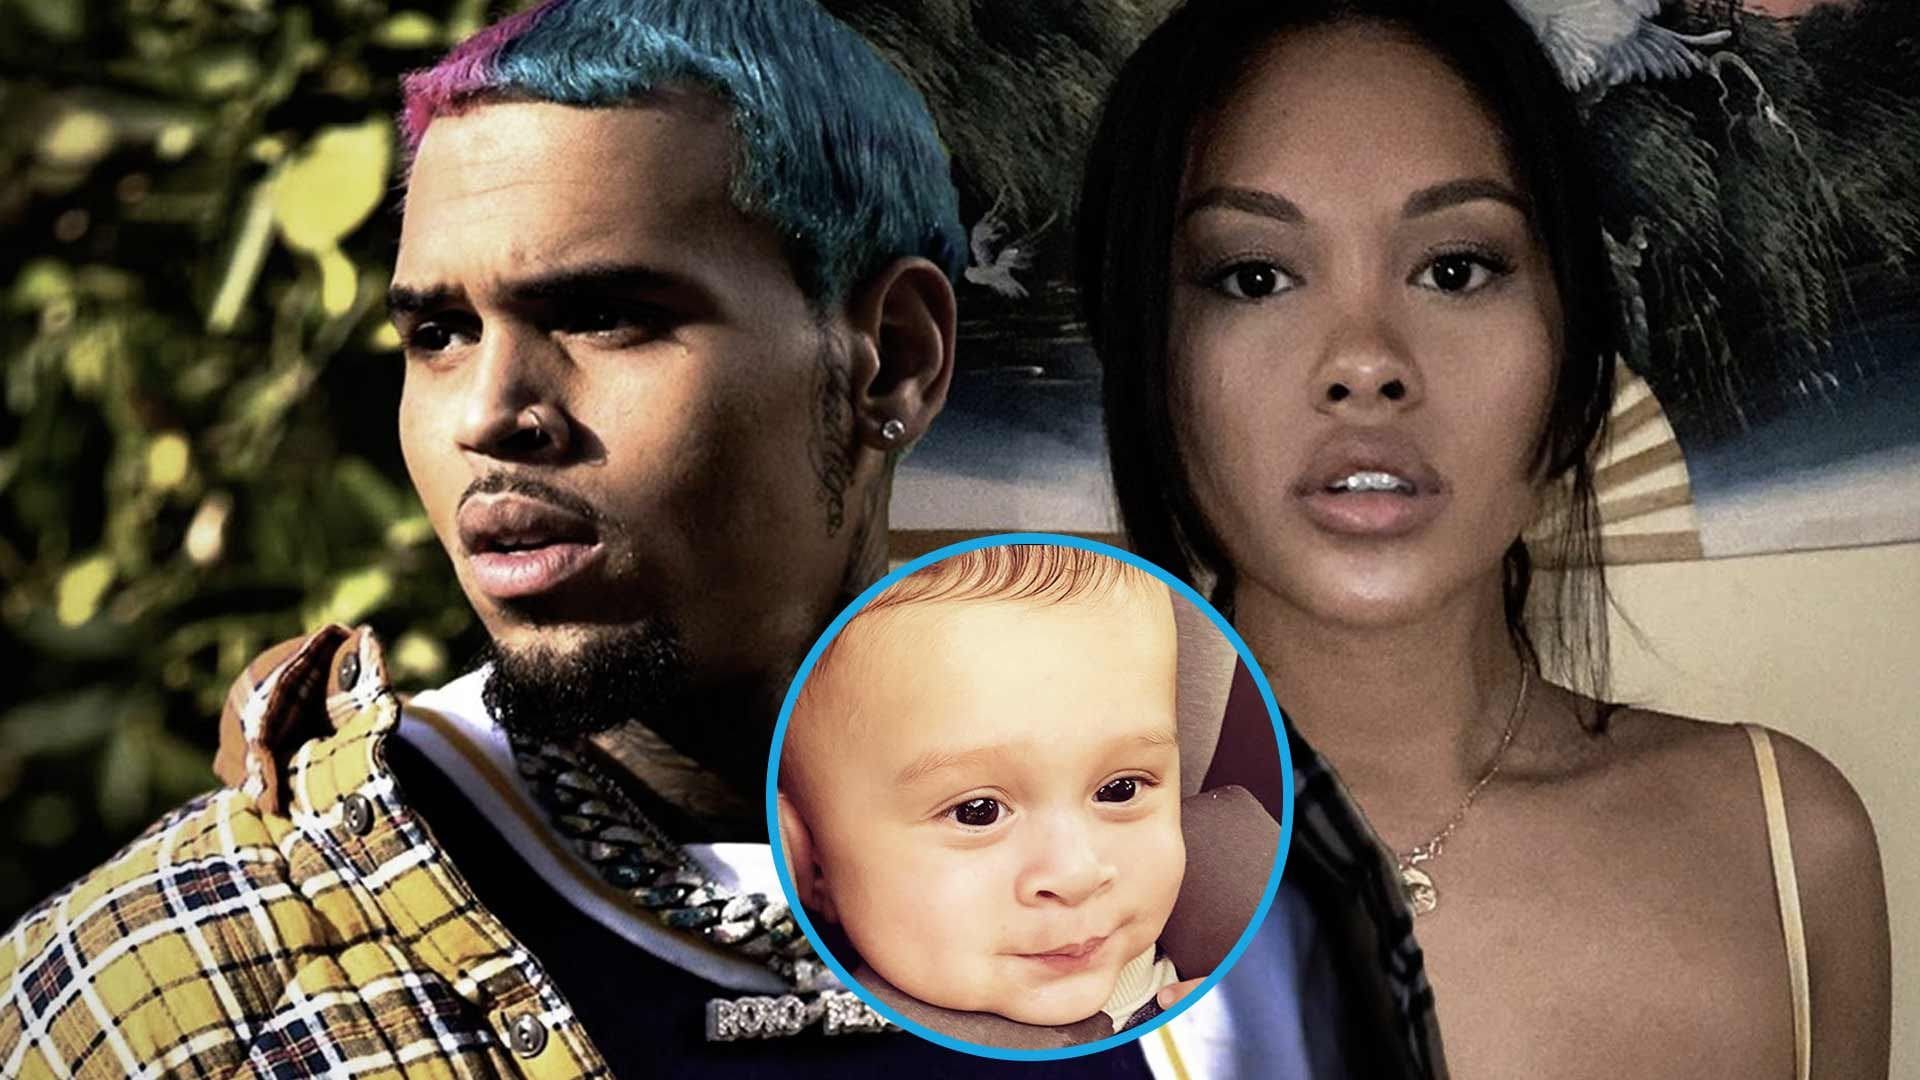 Chris Brown Shares A Photo With Ammika Harris And Their Baby Boy Aeko - See It Here!